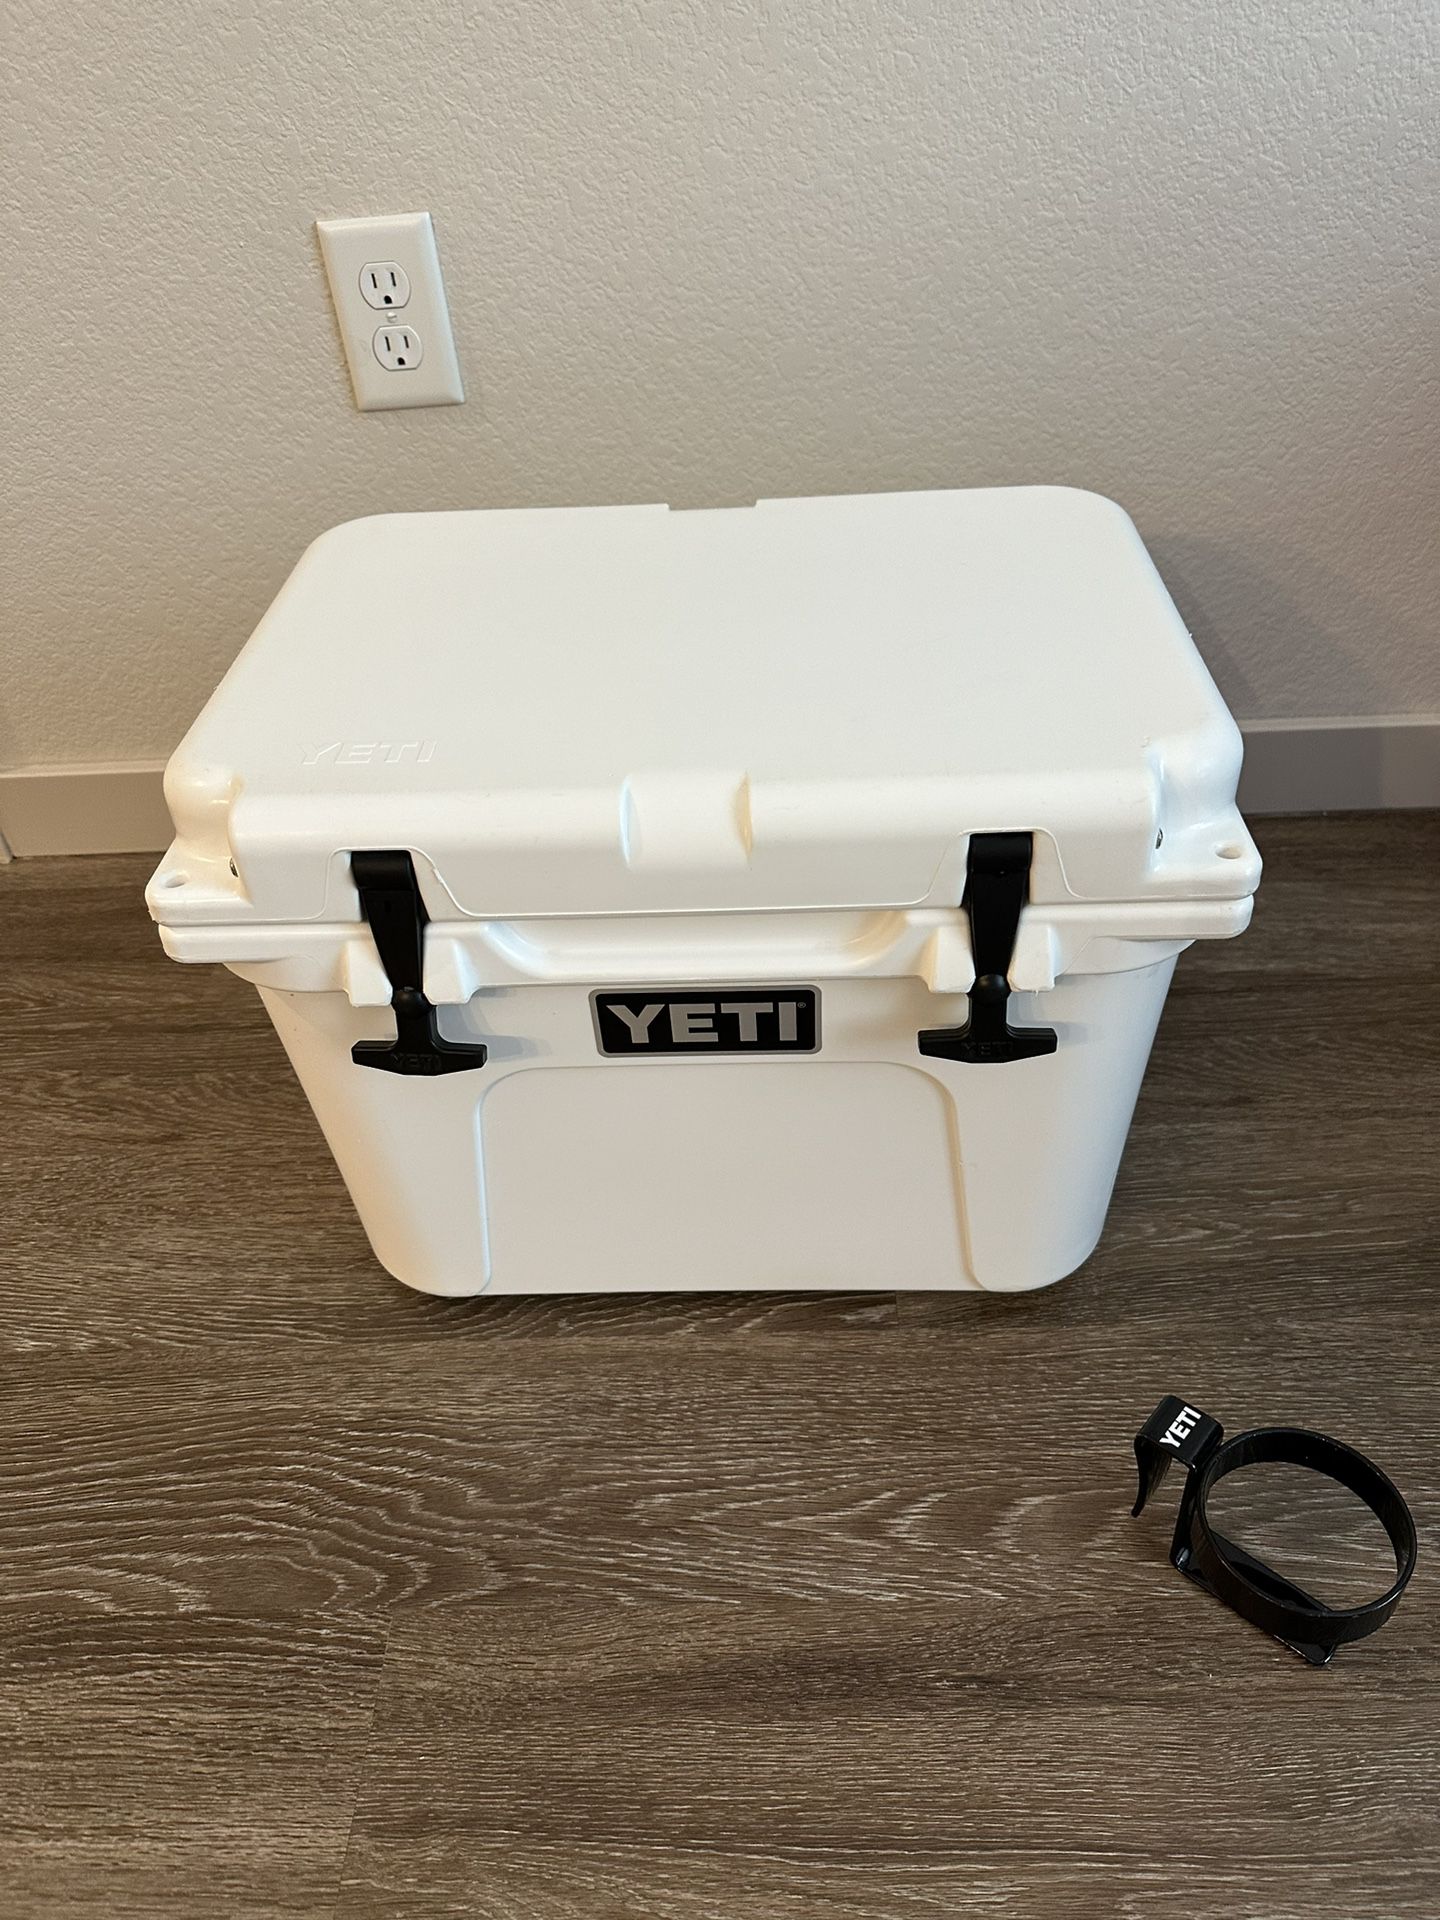 YETI Roadie 20 Cooler w/ 2 Cup Holders - Excellent Conditions